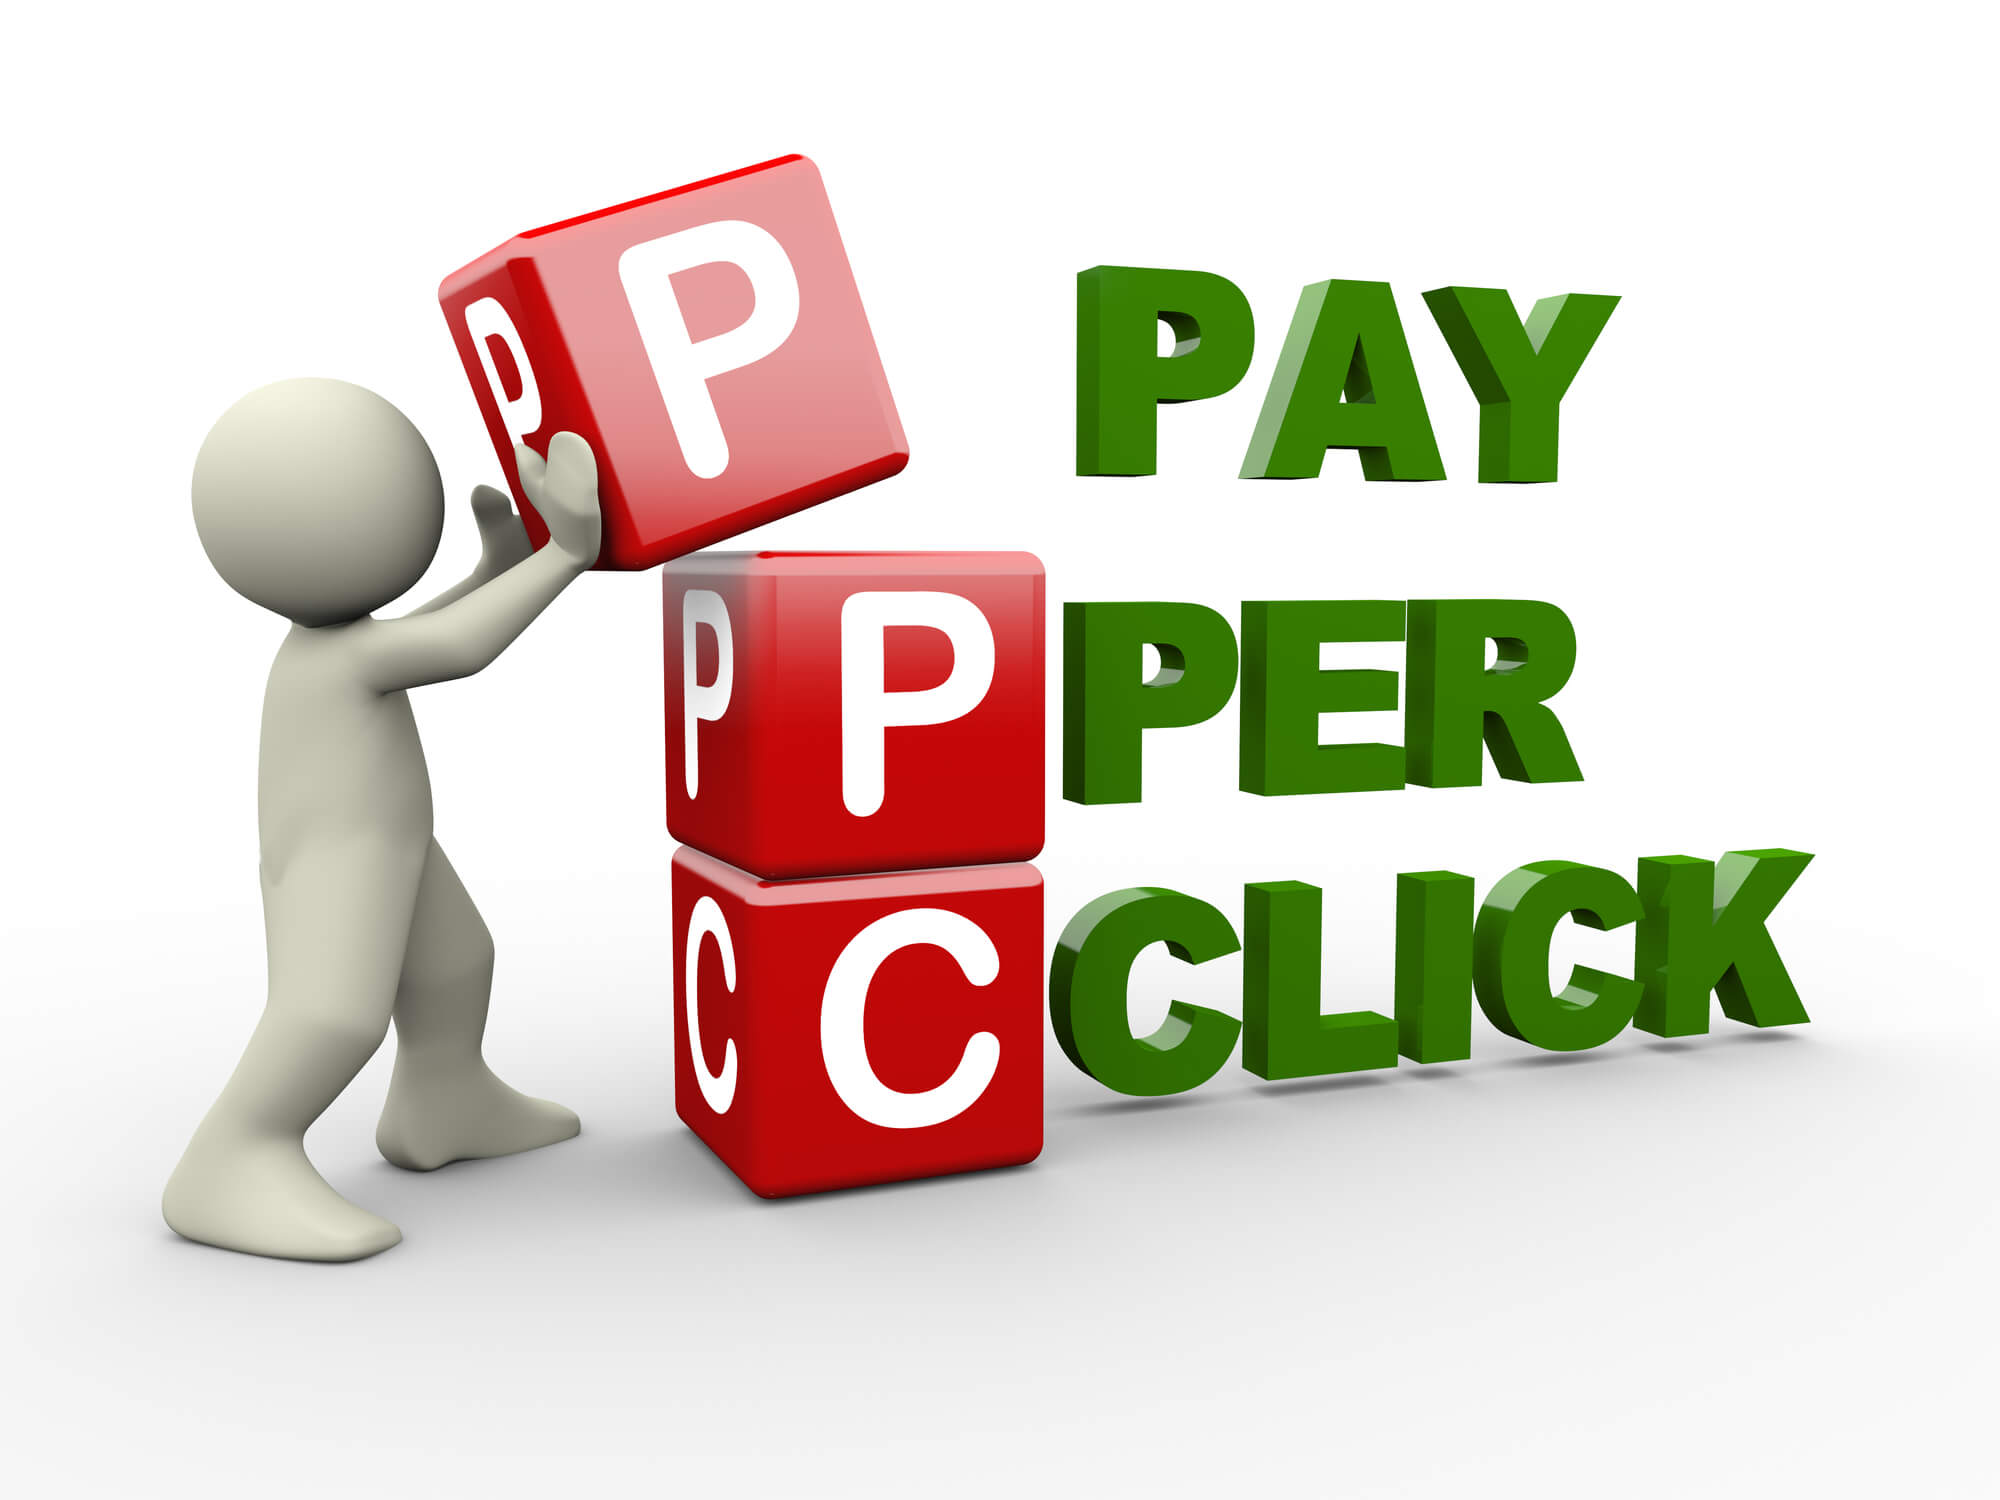 Earn money by Pay per click - Placed an advertisement on a website - Part 1